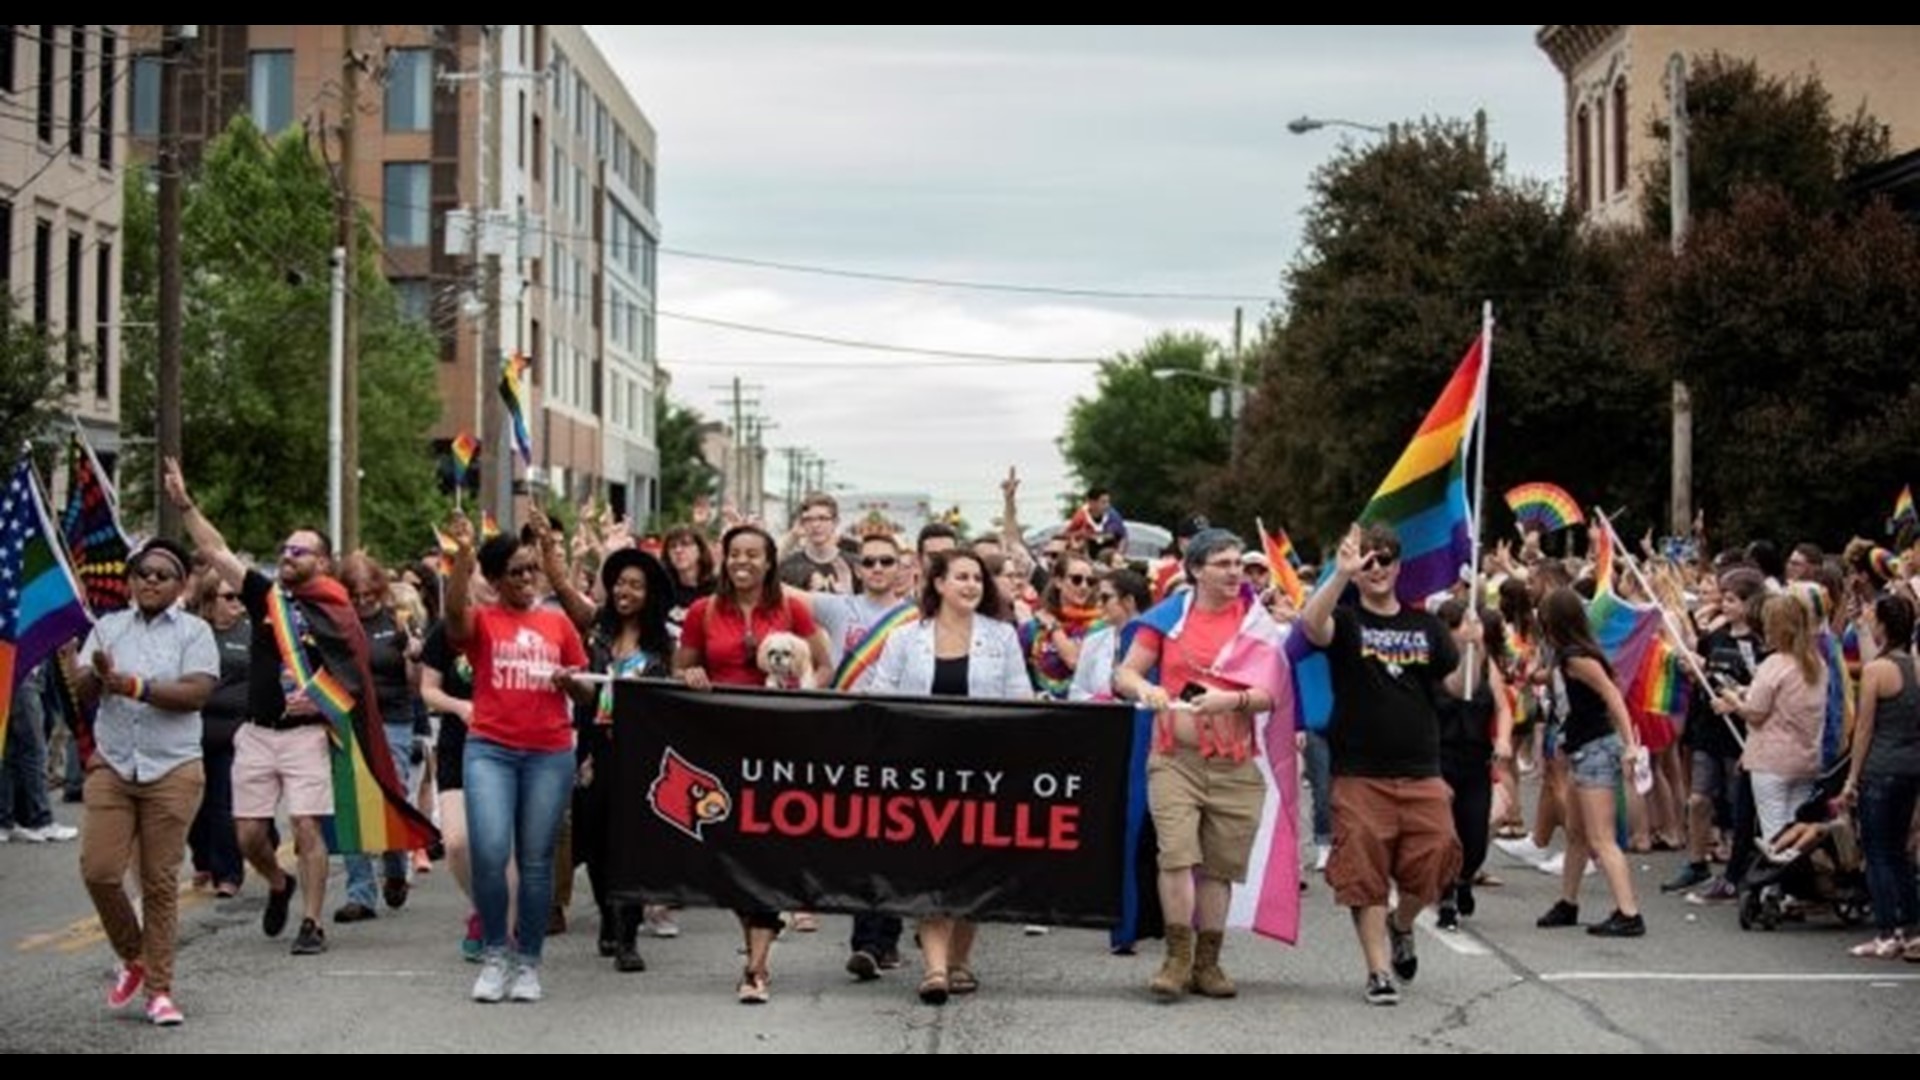 UofL recognized as safe, environment for LGBTQ+ folks